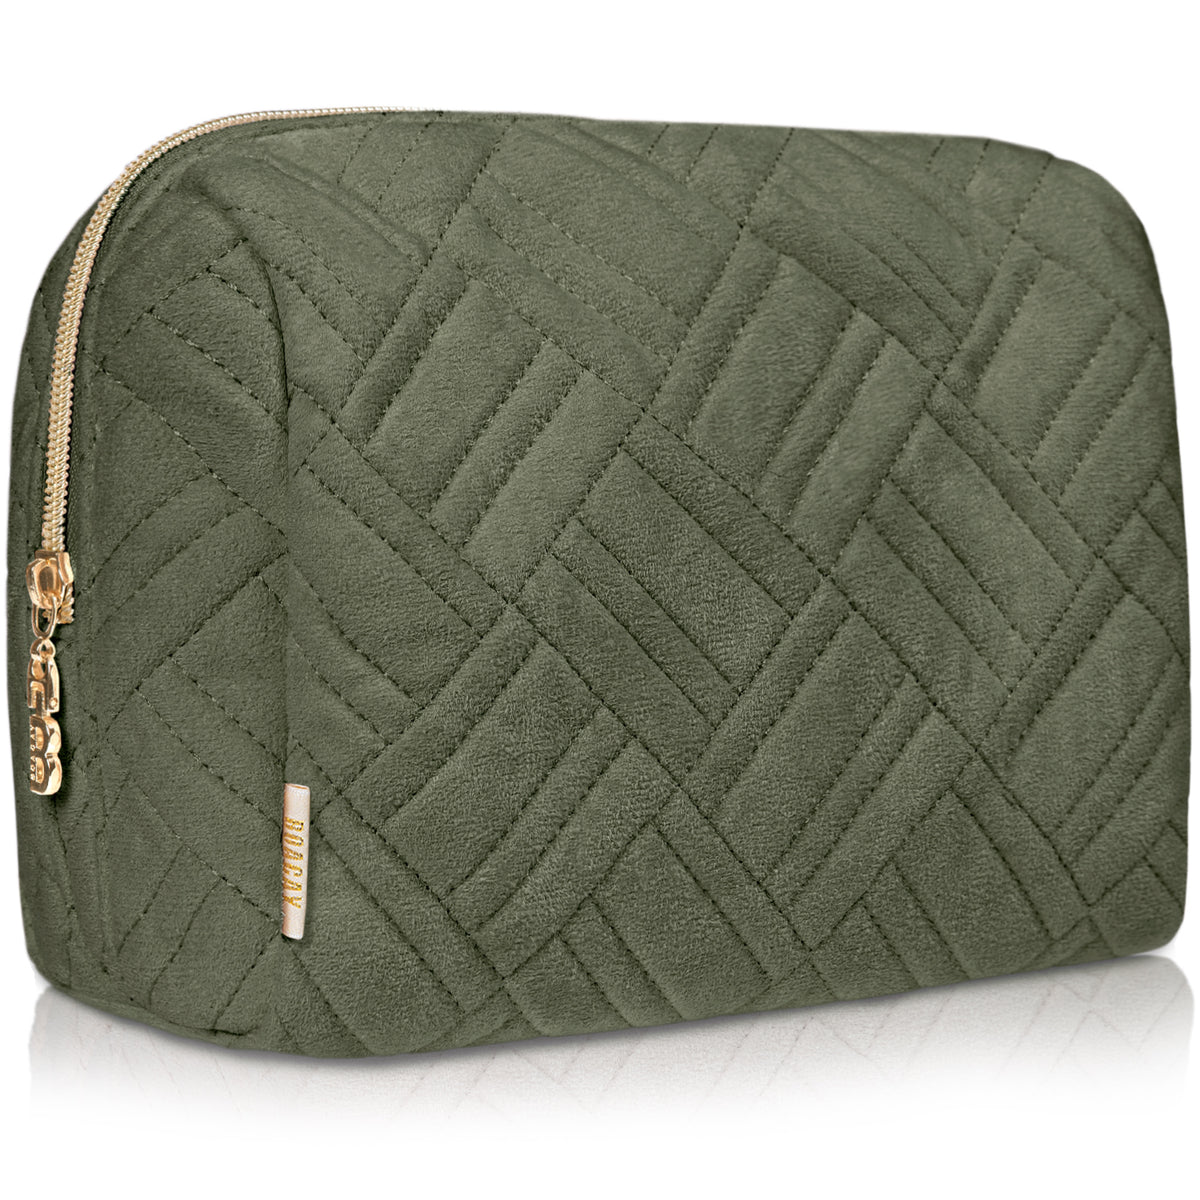 Large Embroidered Cosmetic Pouch - Olive Green